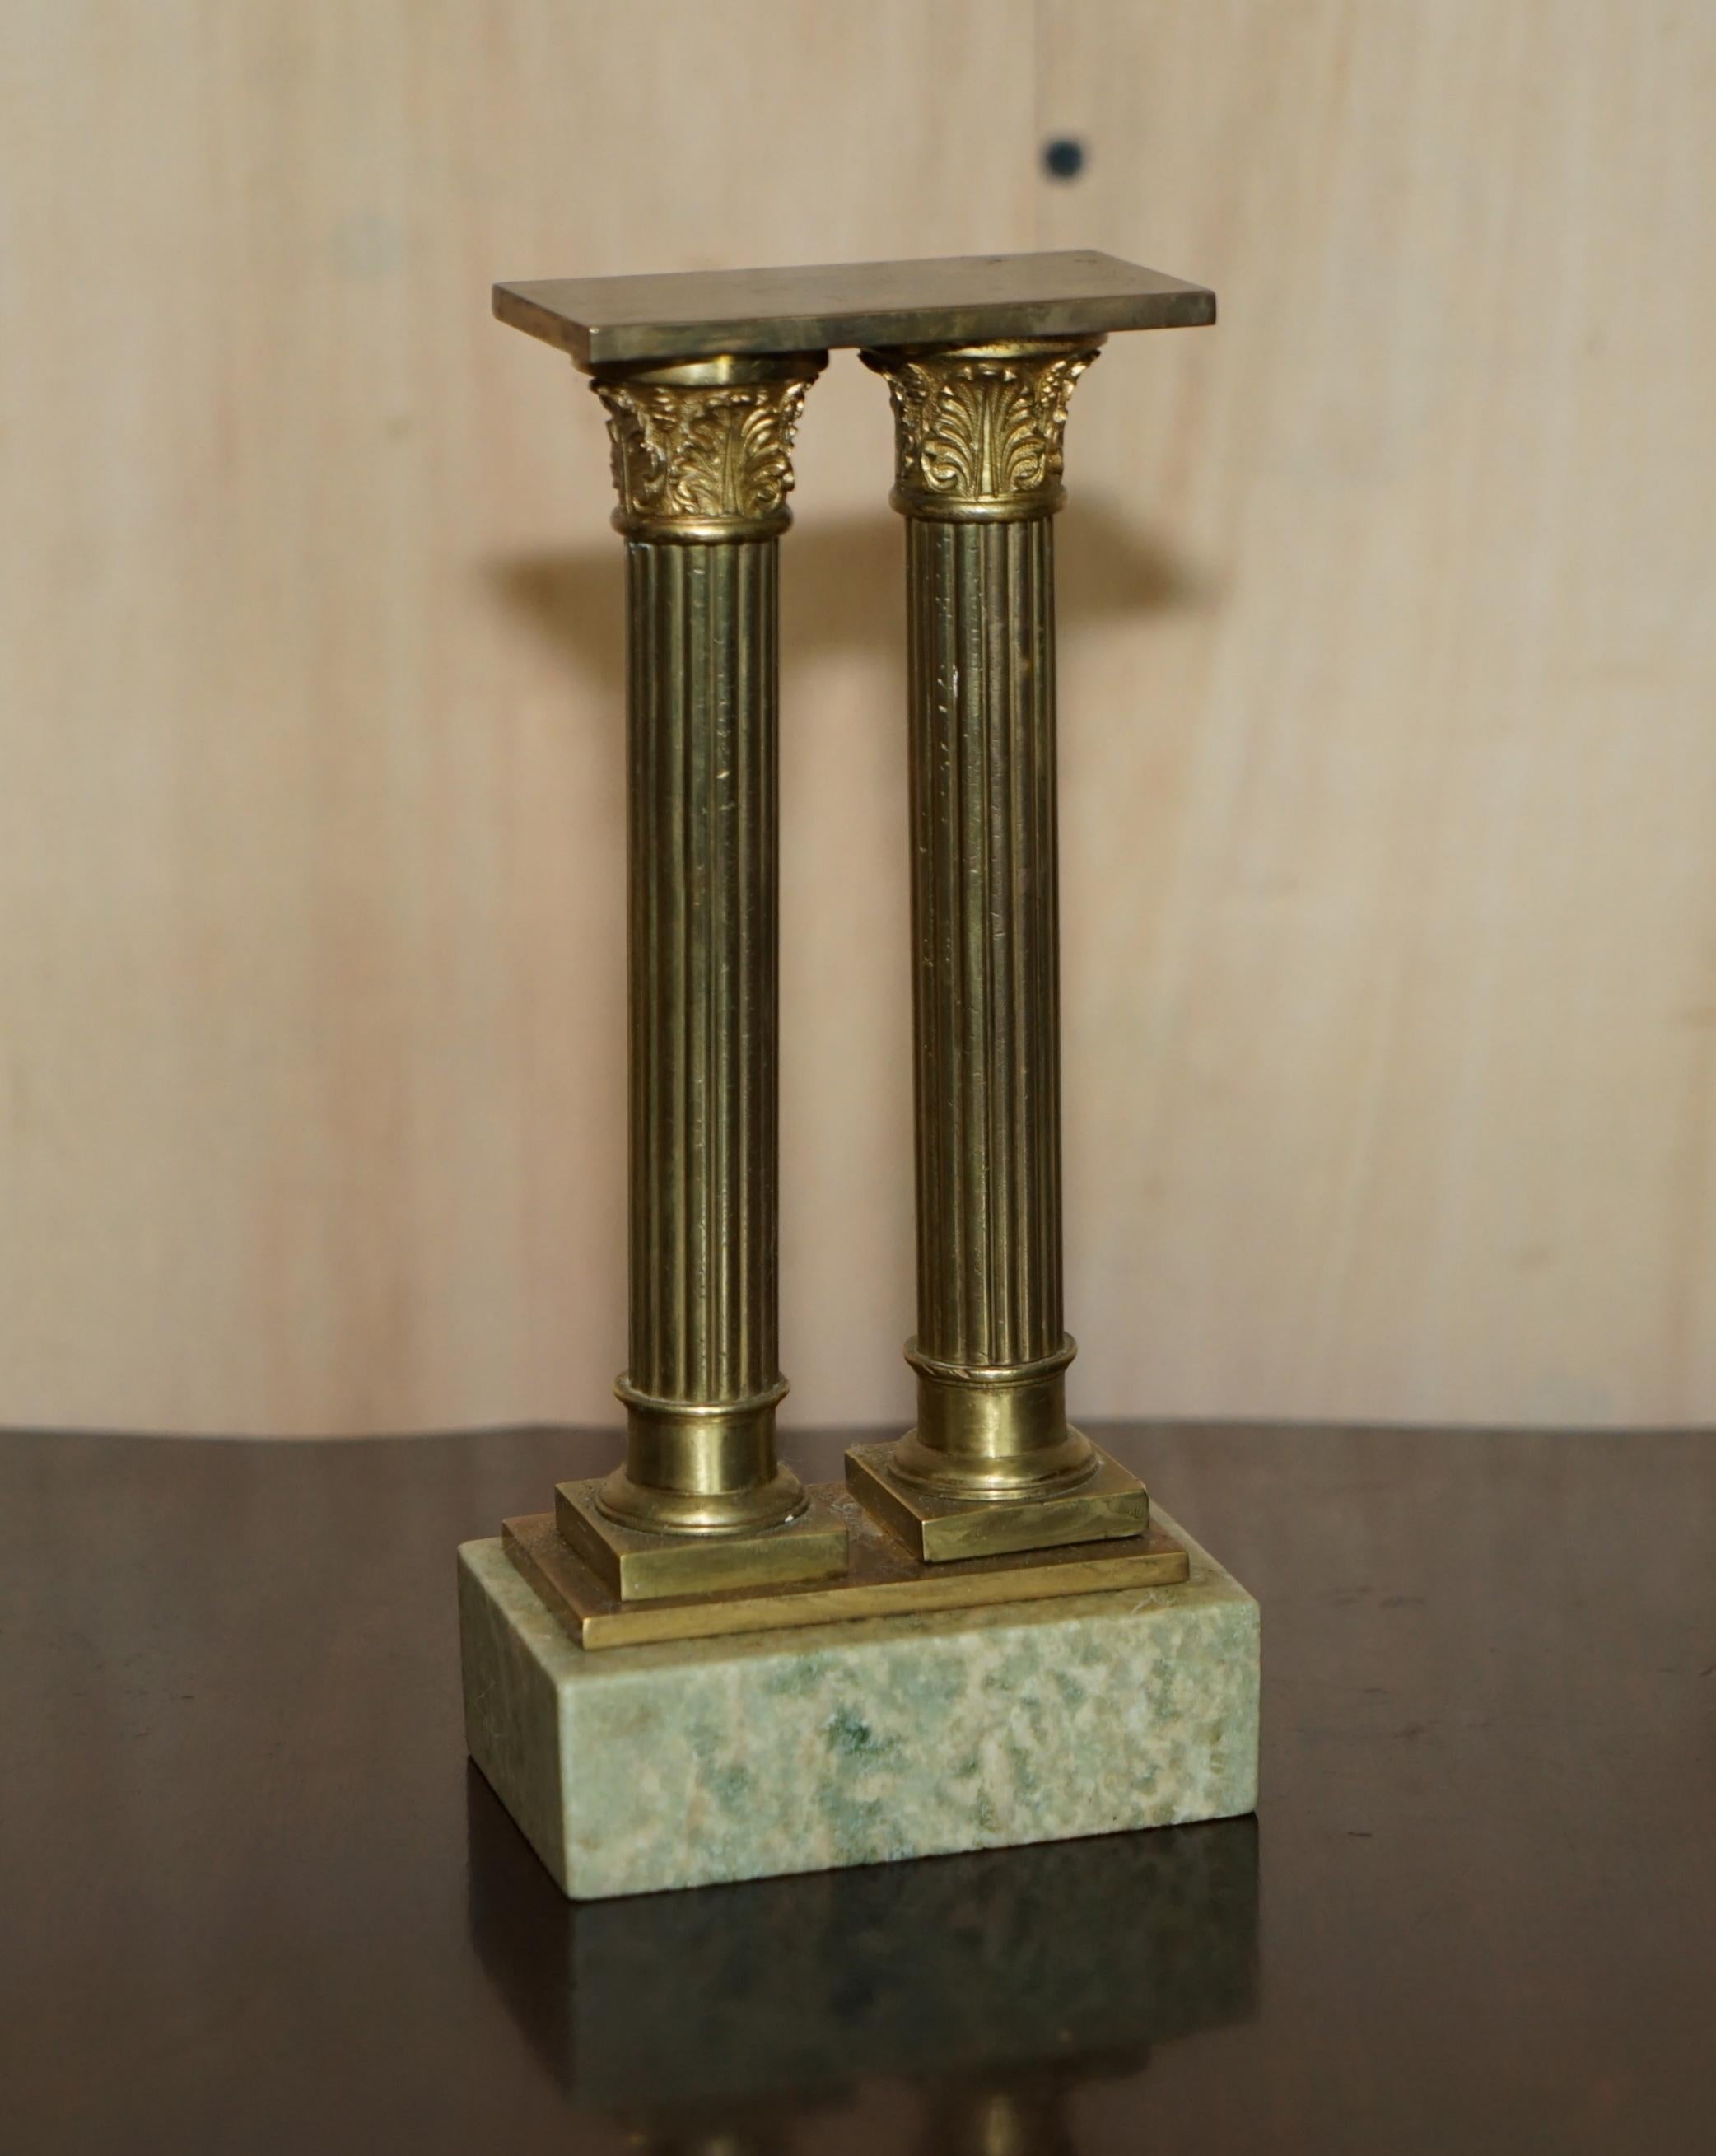 We are is delighted to offer for sale this extremely collectable pair of original Victorian Marble & Brass Grand Tour Roman Ruin statue of columns.

A wonderful original pair, these are desk sized and very collectable, these Roman pillars are just